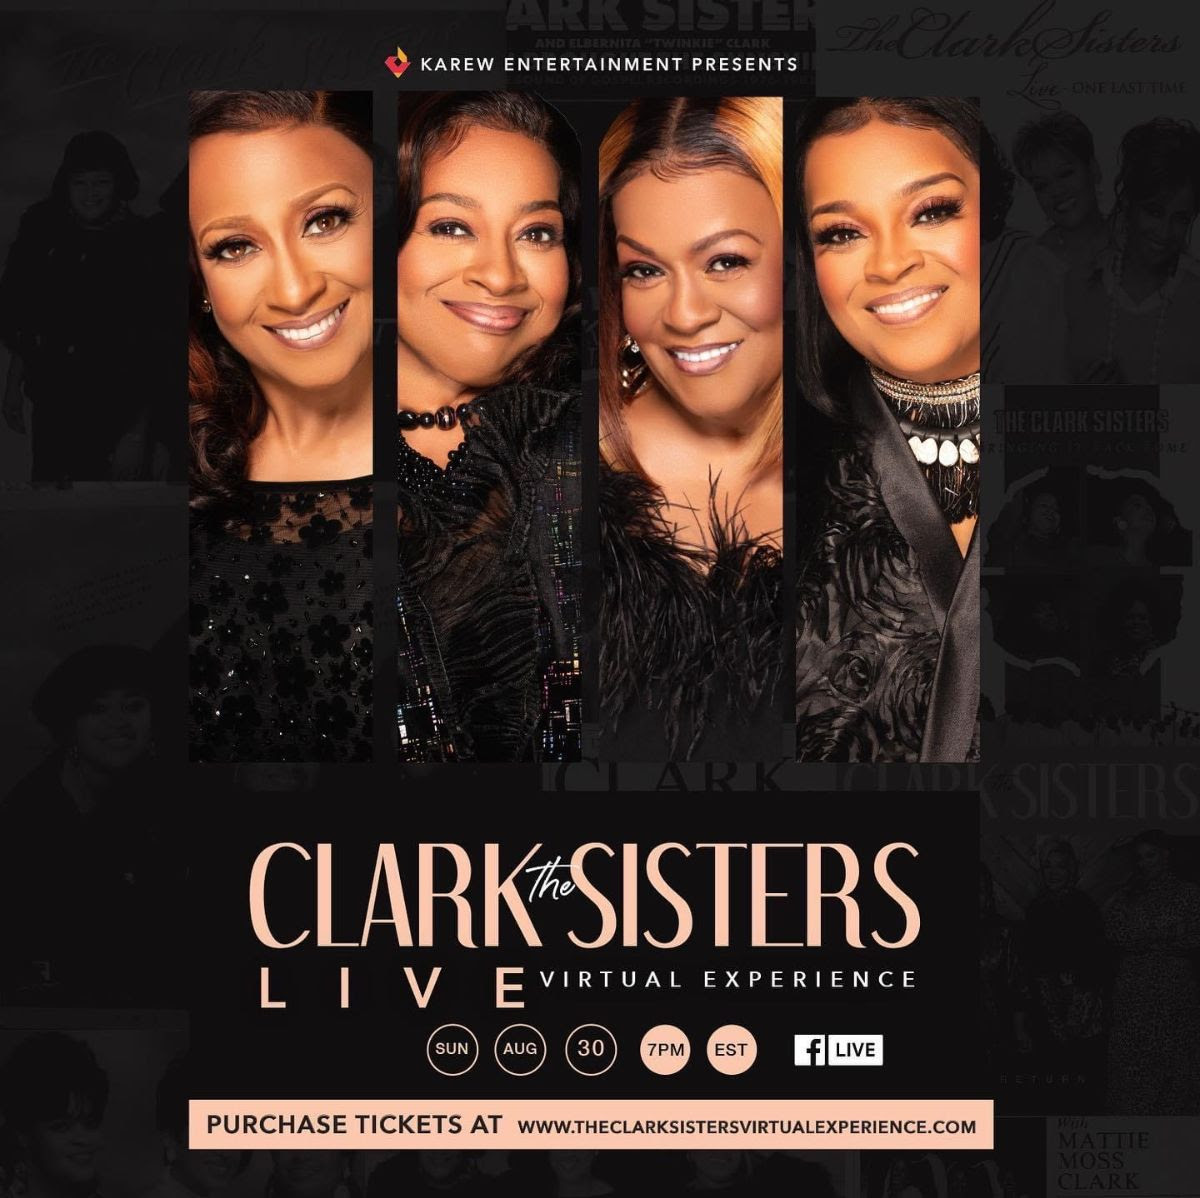 The Legendary Clark Sisters’ Virtual Concert Tickets Available Now